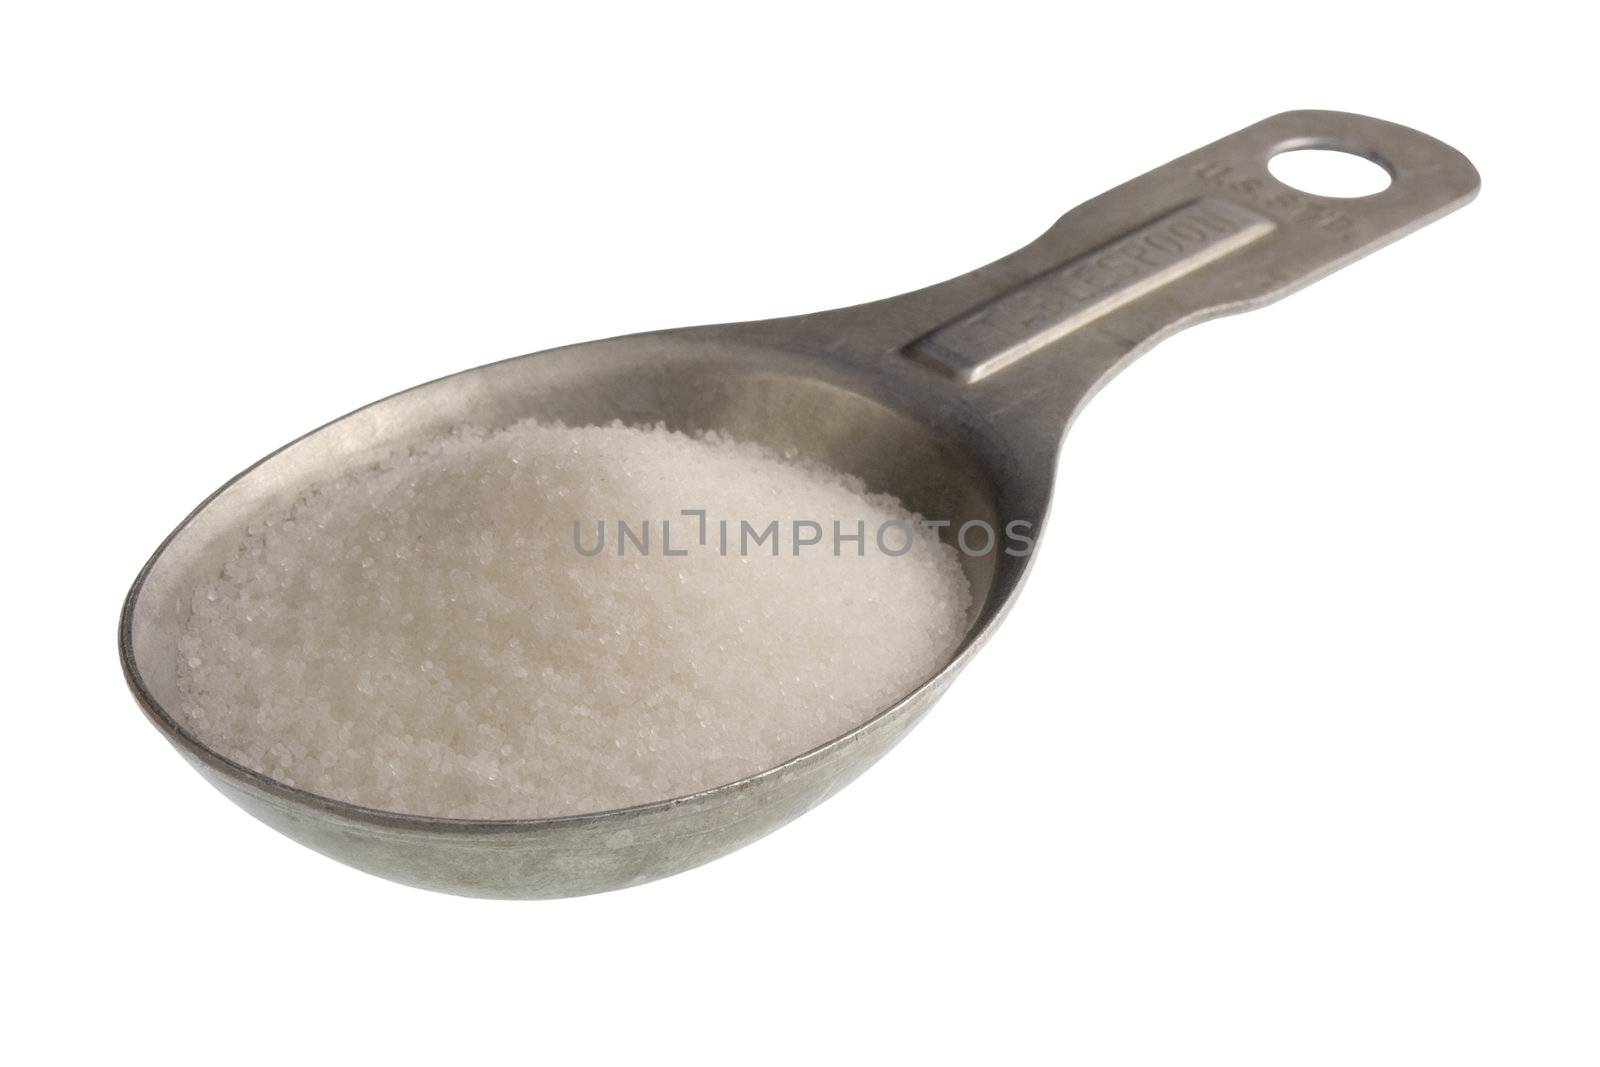 old aluminum measuring spoon full of salt isoalted on white, clipping path included